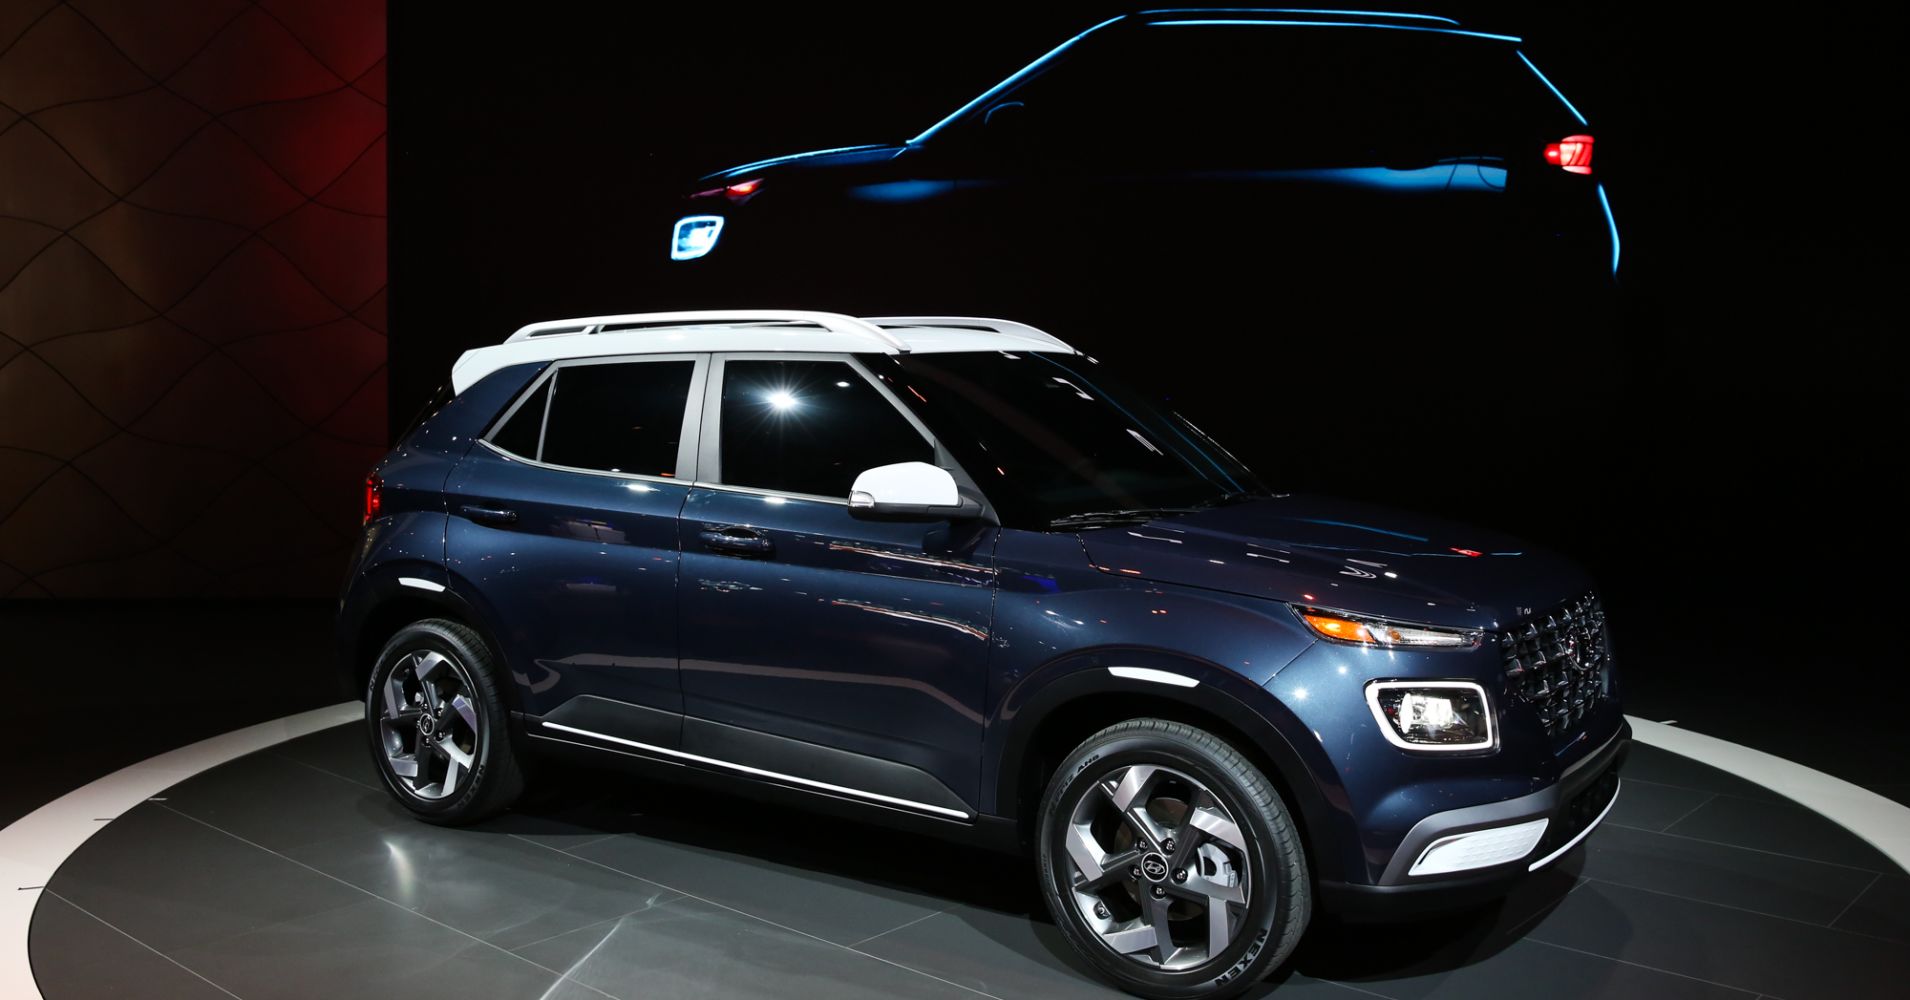 Hyundai aiming for entry level and used car buyers with new SUV